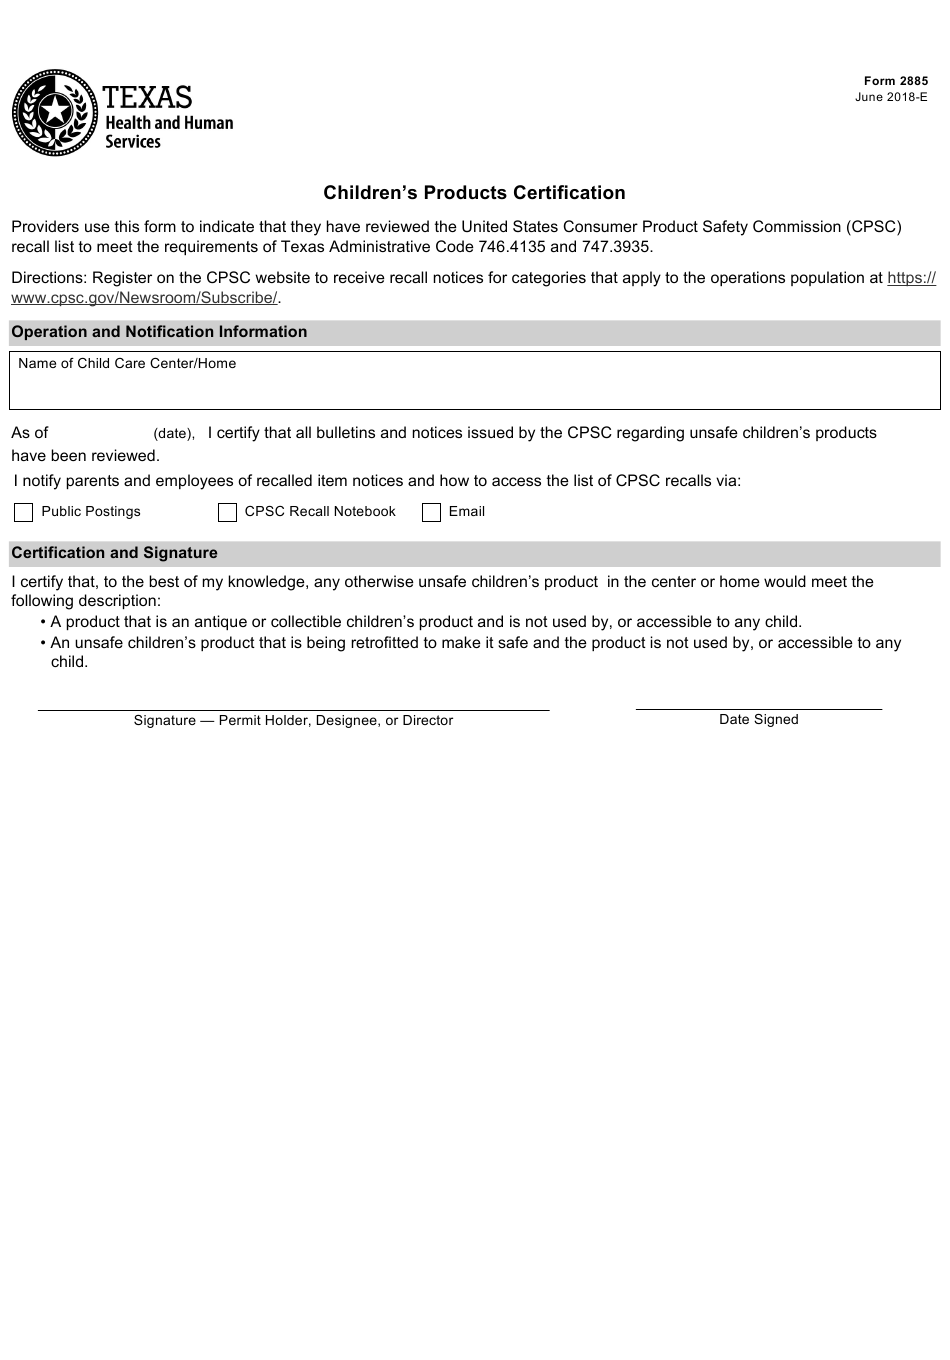 texas-health-and-human-services-form-h1020-serviceform